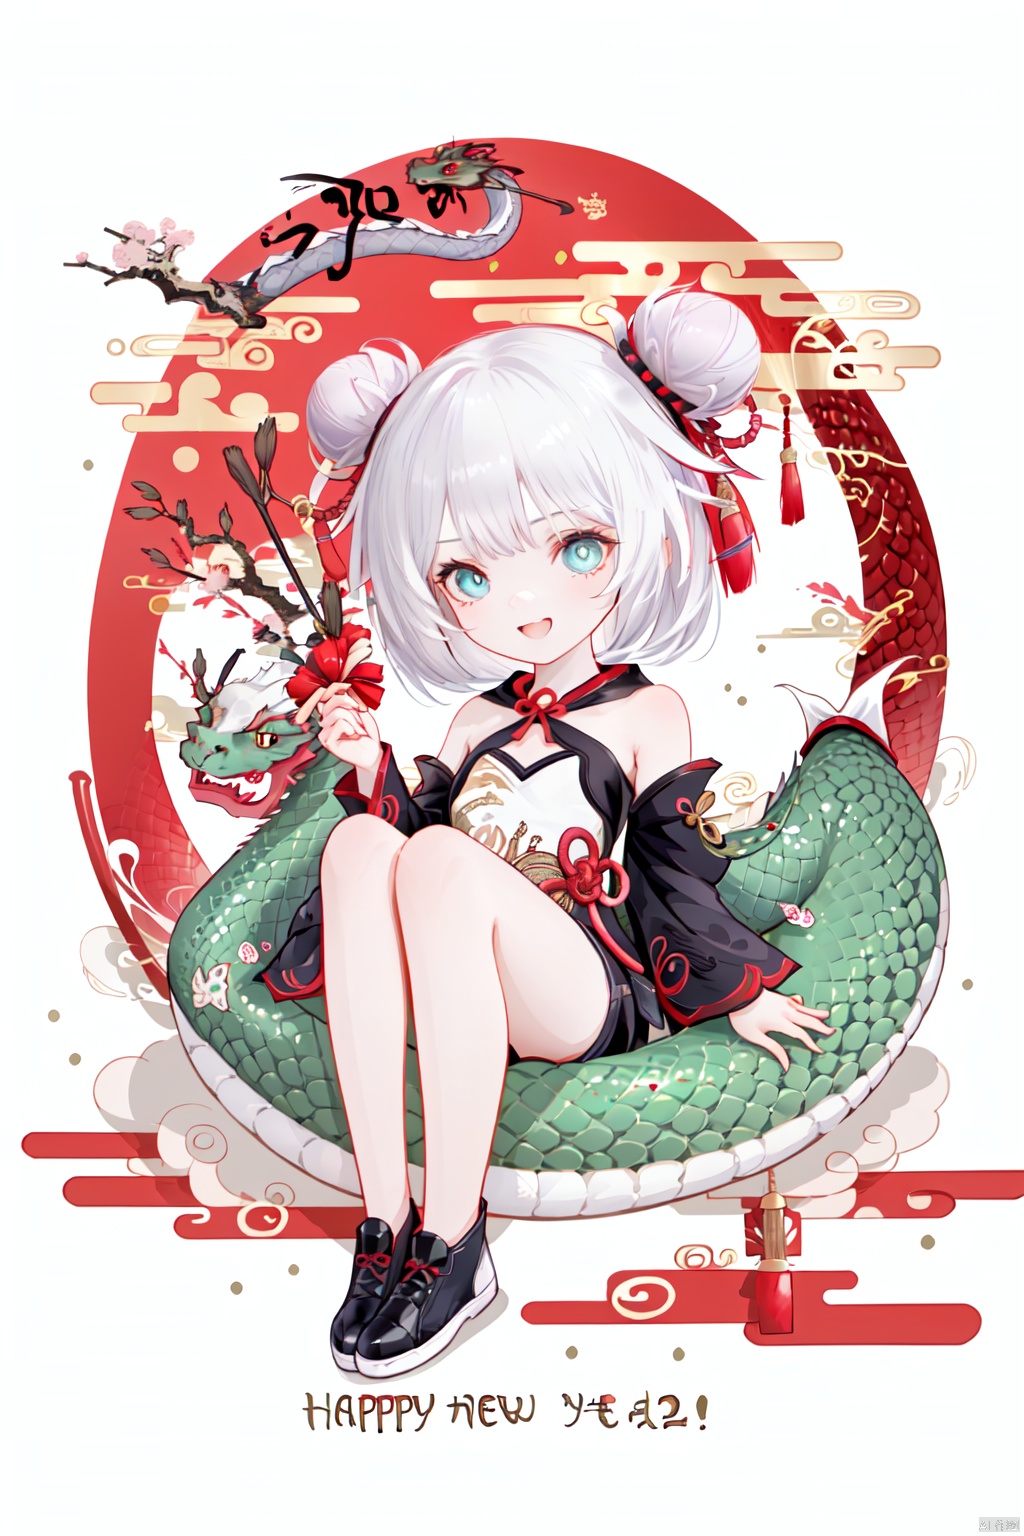  {artist:rella}, {artist:ask(askzy)},[artist:ningen_mame],artist:ciloranko, [artist:rei(sanbonzakura)],(hyper cute girl:1.1025), (flat color, vector art:1.3401), Chinese dragon theme, beautiful detailed eyes, hyper-detailed, hyper quality, eye-beautifully color, face, (her hair is shaped like a Chinese dragon, Chinese dragon, hair, Chinese dragon:1.2763), (1girl:1.2155), (high details, high quality:1.1576), (backlight:1.1576), high quality, (title:happy new year 2024:1.3), (cover design:1.2), simple background, cover art, trim, album_art, 
/, /, /, /, /, /, /, 
1girl, (chibi), (tangou:1.3), 1girl, theresa apocalypse, double bun, hair bun, chinese clothes, blue eyes, bare shoulders, bangs, white short hair, black shorts,
/, /, /, /, 
(((holding a little Chinese dragon))), (((sitting, Chinese dragon on legs))), [[smile]], large breast, dragon, (((Chinese dragon print))), (Loong:1.2), pajamas, kimono, bare shoulders, 
/, /, /, /, /, /, 
Chinese text,red_bandeau,year of the loong,loong pattern,lantern, red background, ((simple background)), ((happy new year 2024, new year theme, new year, 2024, gift box,)), (red decorations on dragon), ((Chinese new year)), Chinese knot, red ornaments, spring festival, 
/, /, /, /, /, /, /, 
hair with body, CTA dress, CAY leg, Loong hands, body with Loong, dress with Loong, light particles, (Hair with Loong:1.2155), small breast with Loong, 1girl, small breast, marbling with hair and clothes, (original:1.1025), (arm down:1.1025), (paper cutting:1.1025), 
------, 
Low saturation, grand masterpiece, Perfect composition, film light,lightart
,鏃�, eastern dragon, nai3